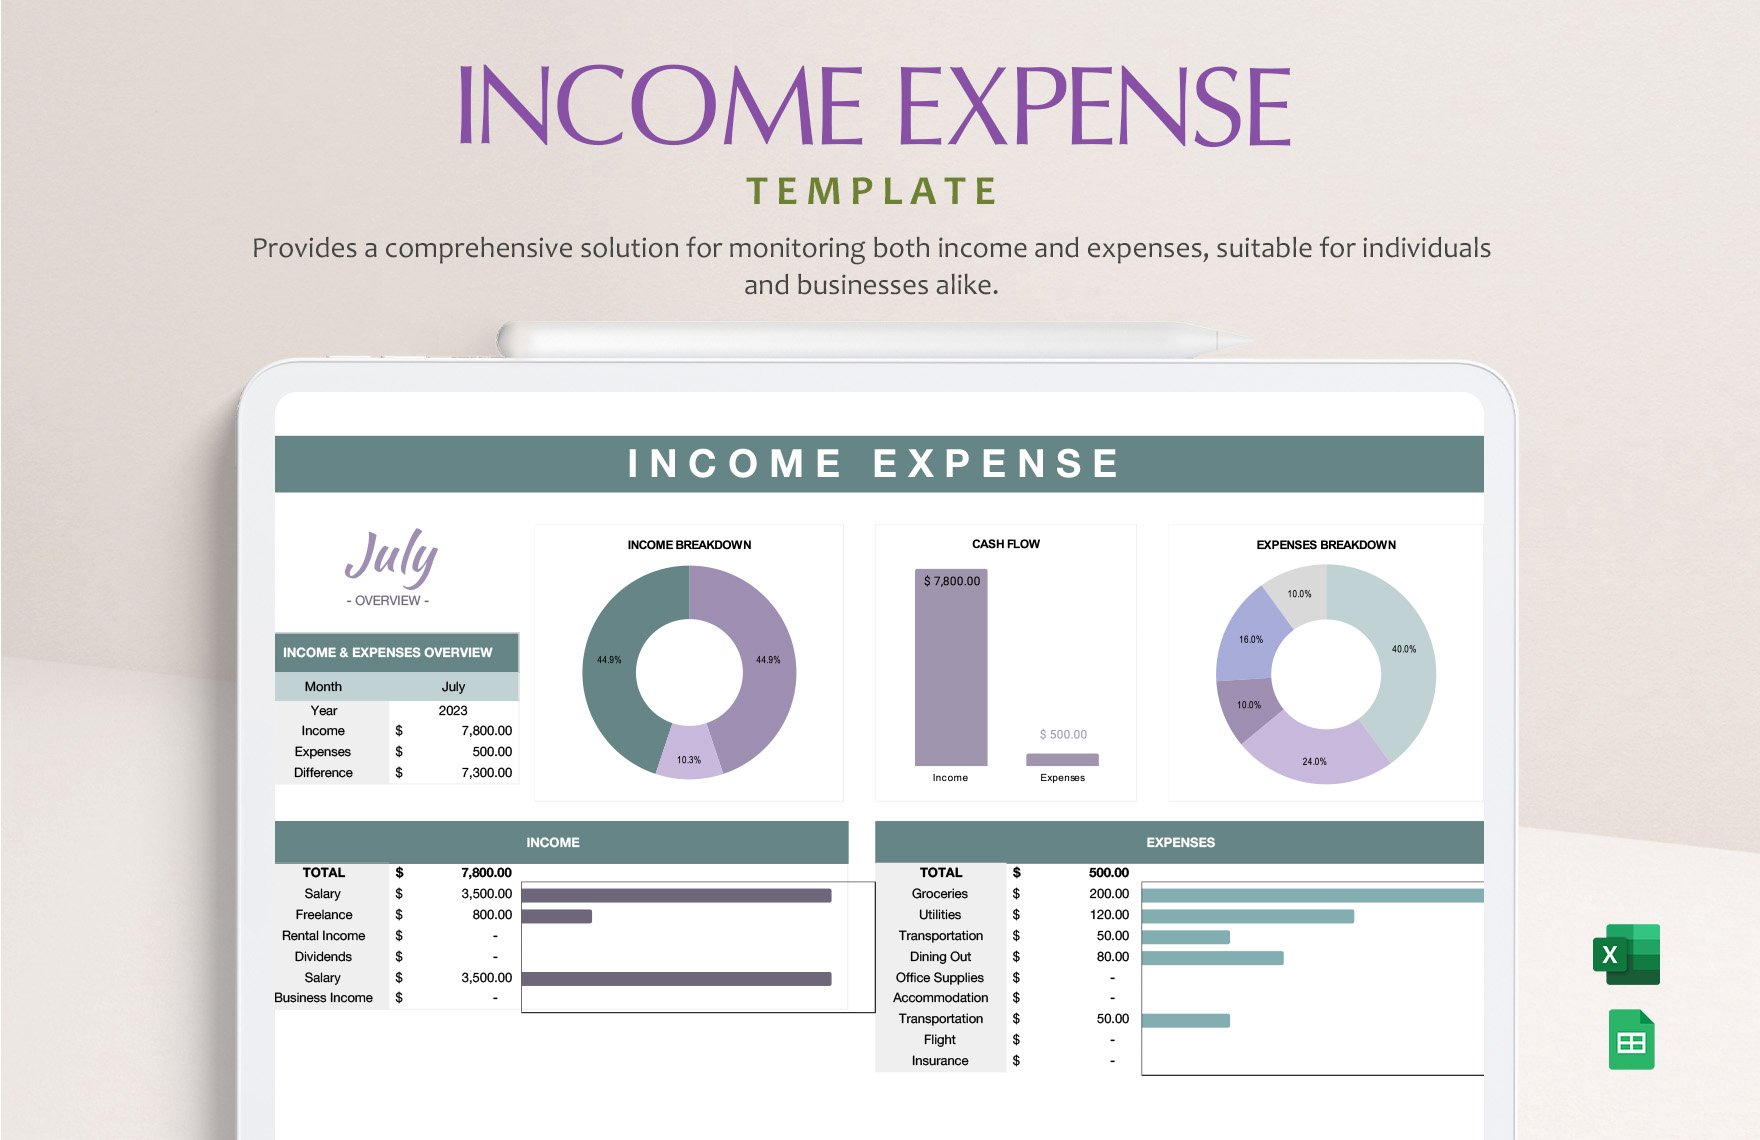 Income Expense template